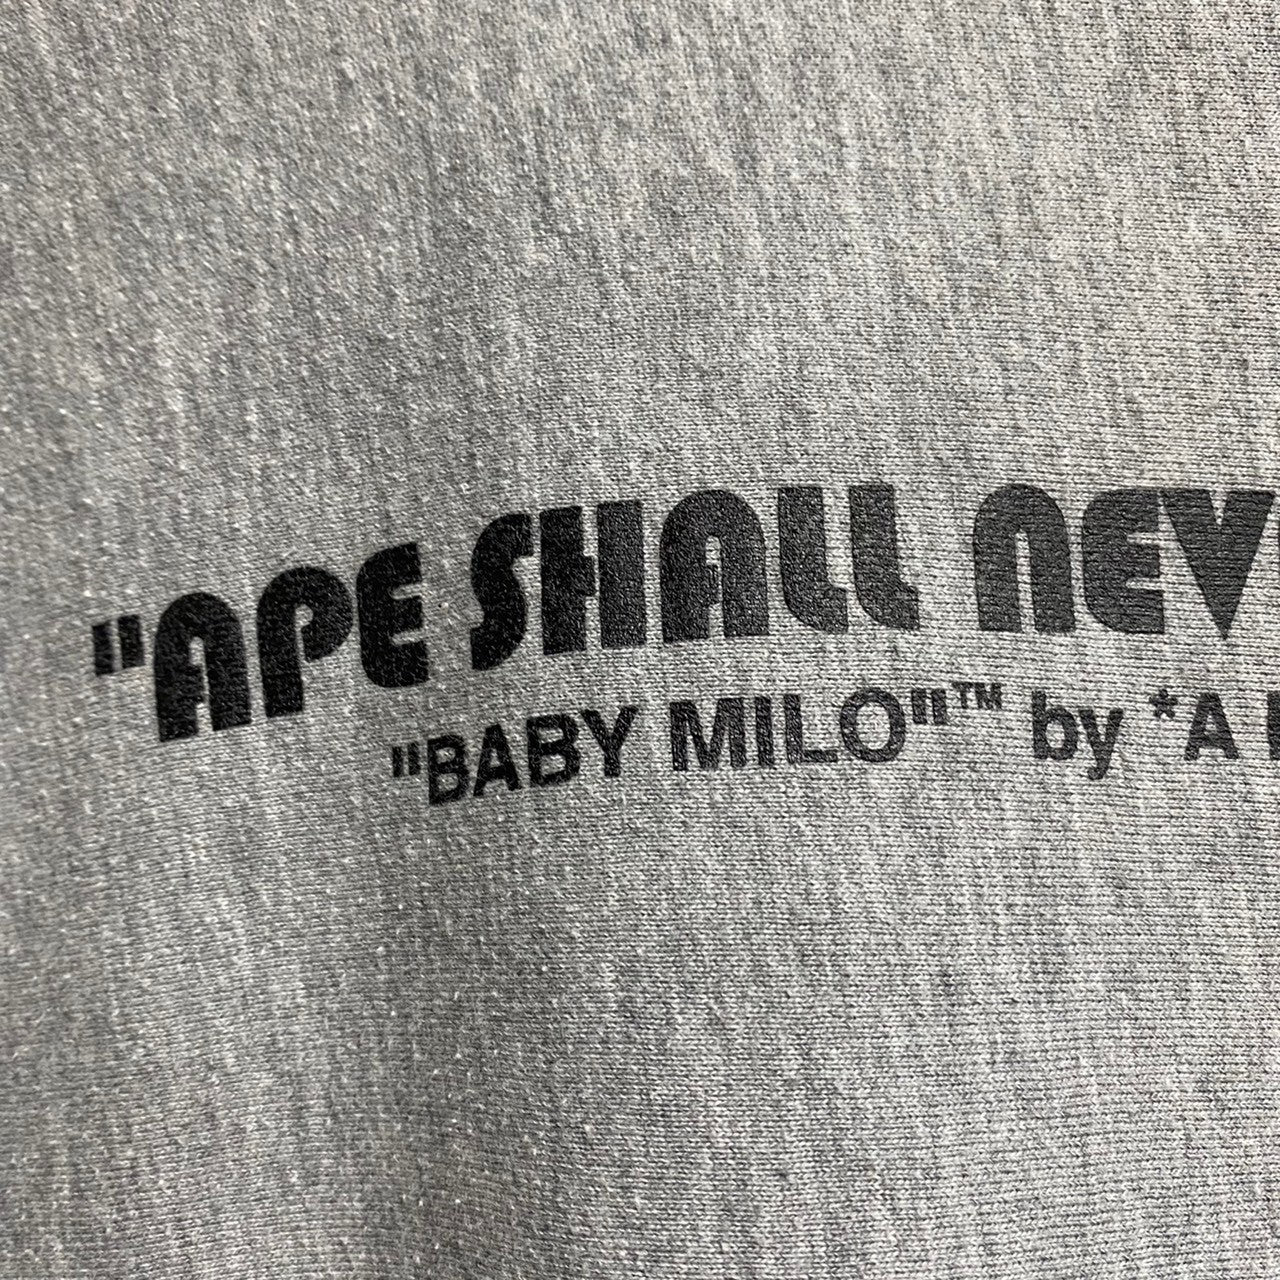 [ ONLY ONE ! ] A BATHING APE CREW NECK SWEAT SHIRT / ARCHIVE